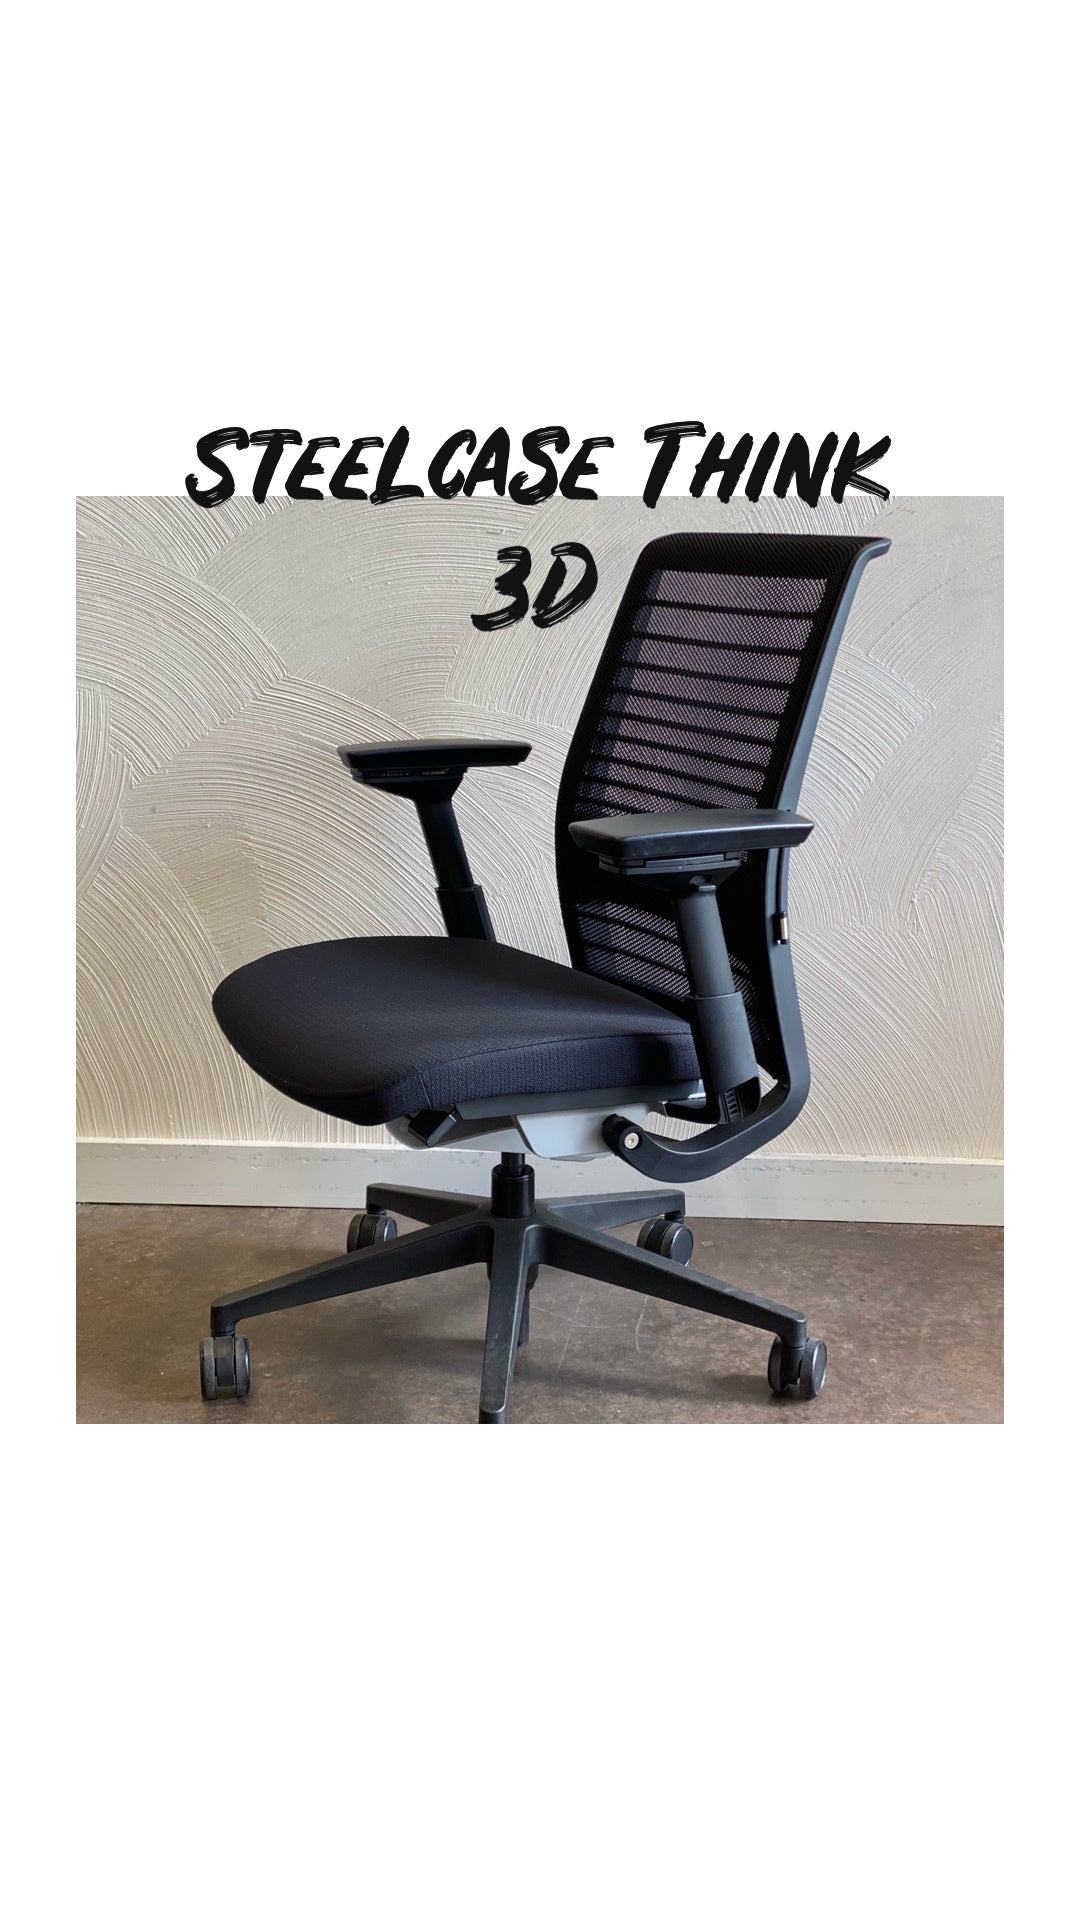 Steelcase Think 3D